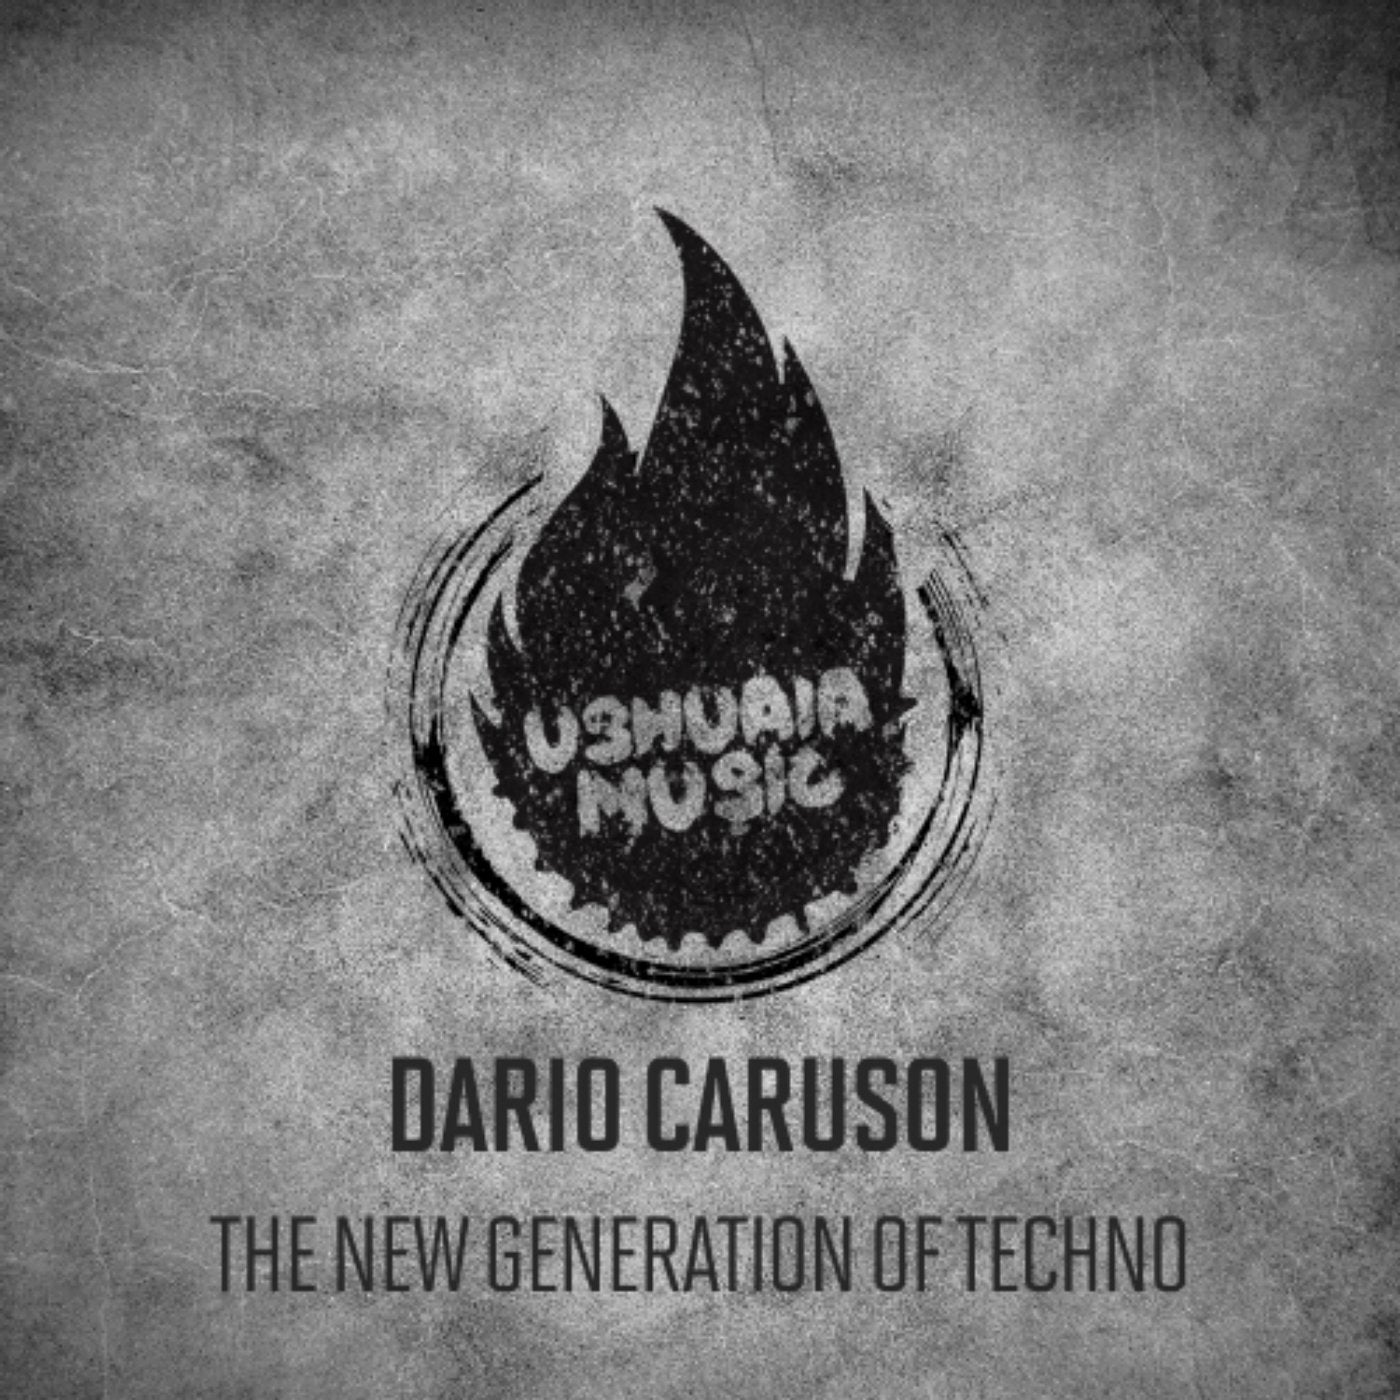 The New Generation Of Techno